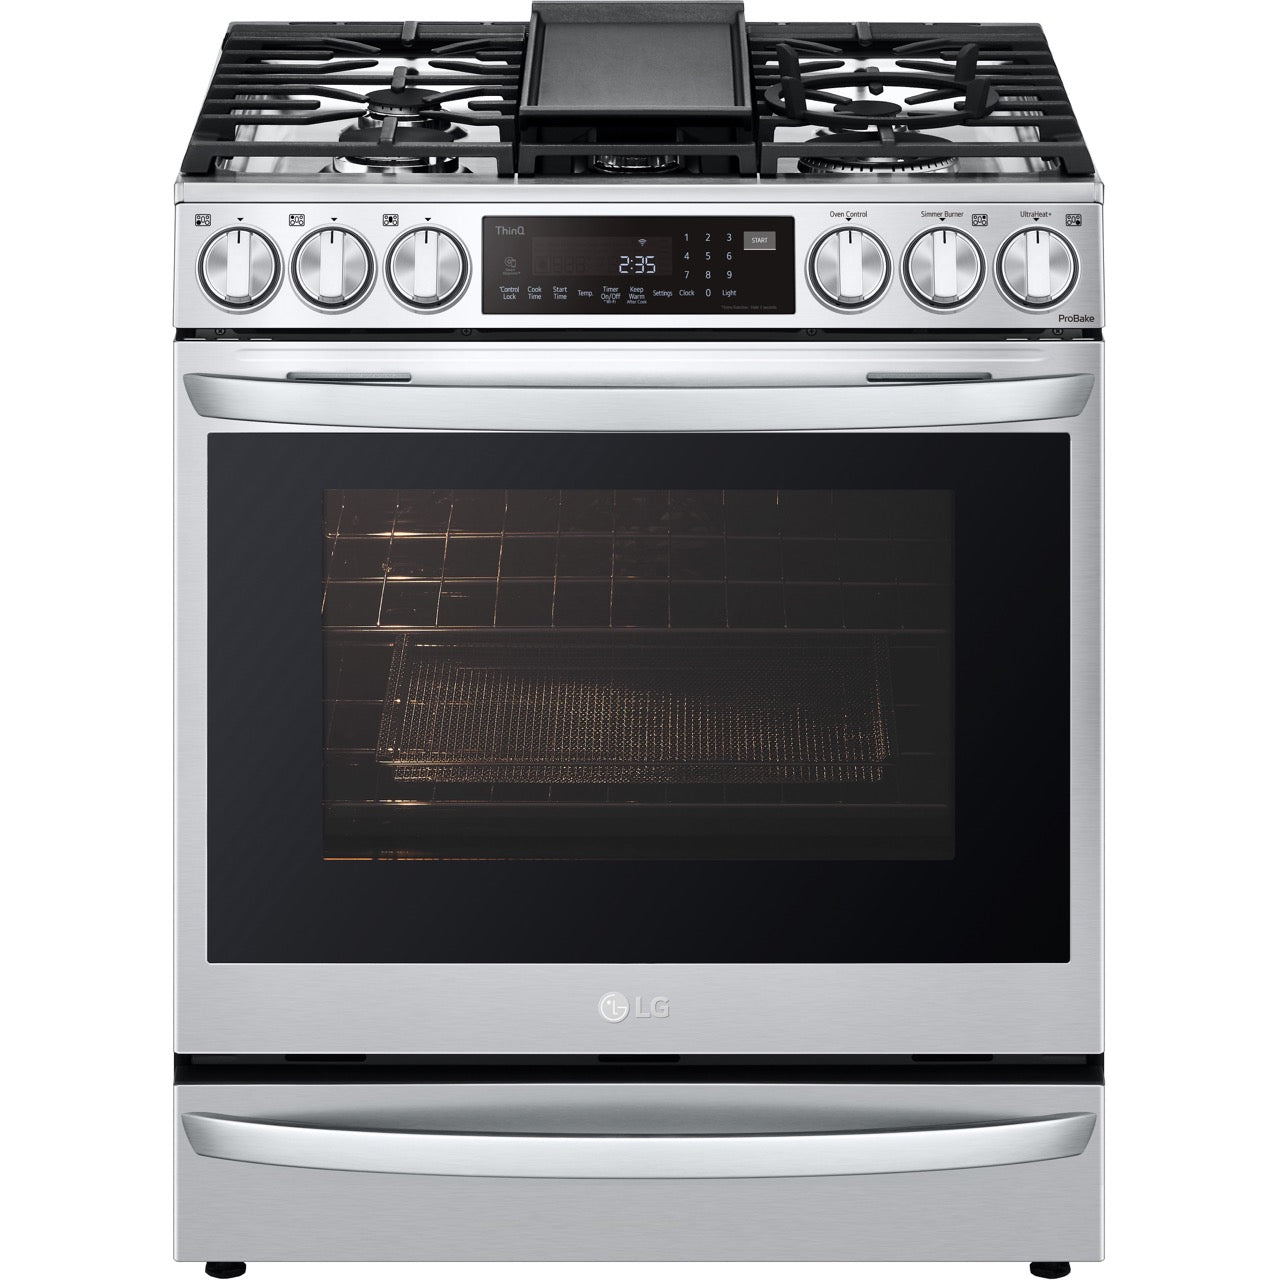 LG 6.3-Cu. Ft. Smart Wi-Fi Enabled ProBake Convection InstaView Gas Slide-in Range with Air Fry, Stainless Steel (LSGL6337F)